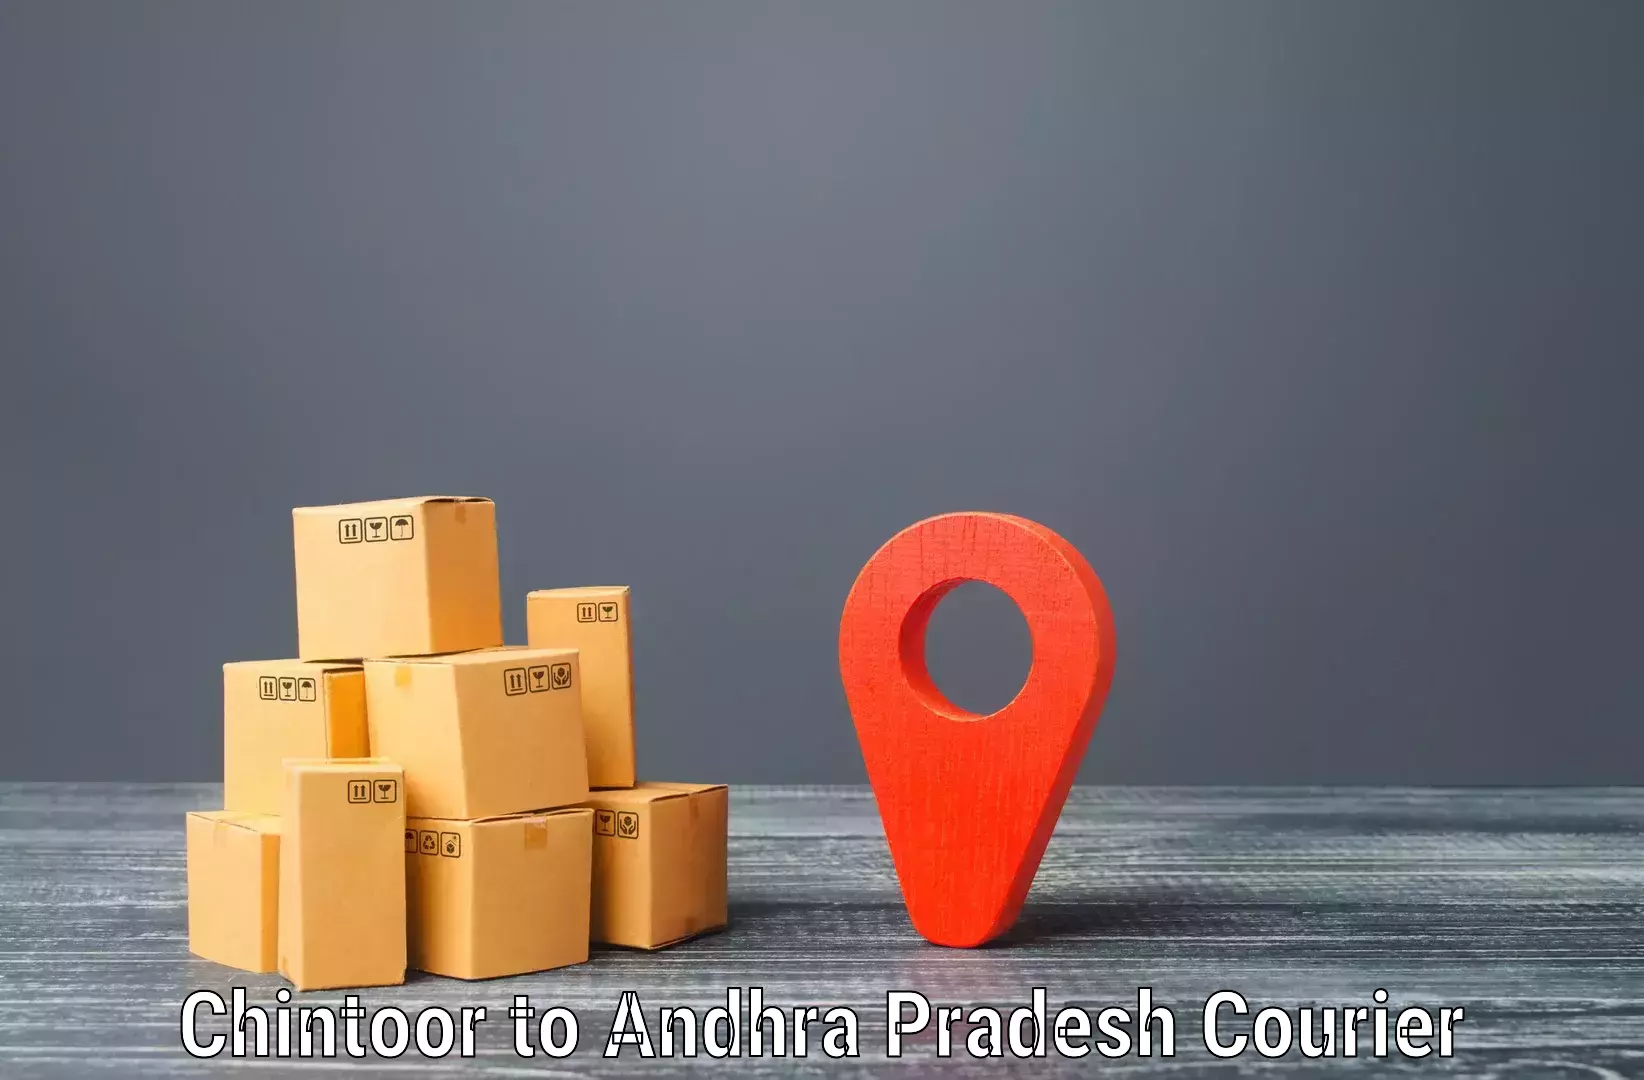 Reliable parcel services Chintoor to Tripuranthakam